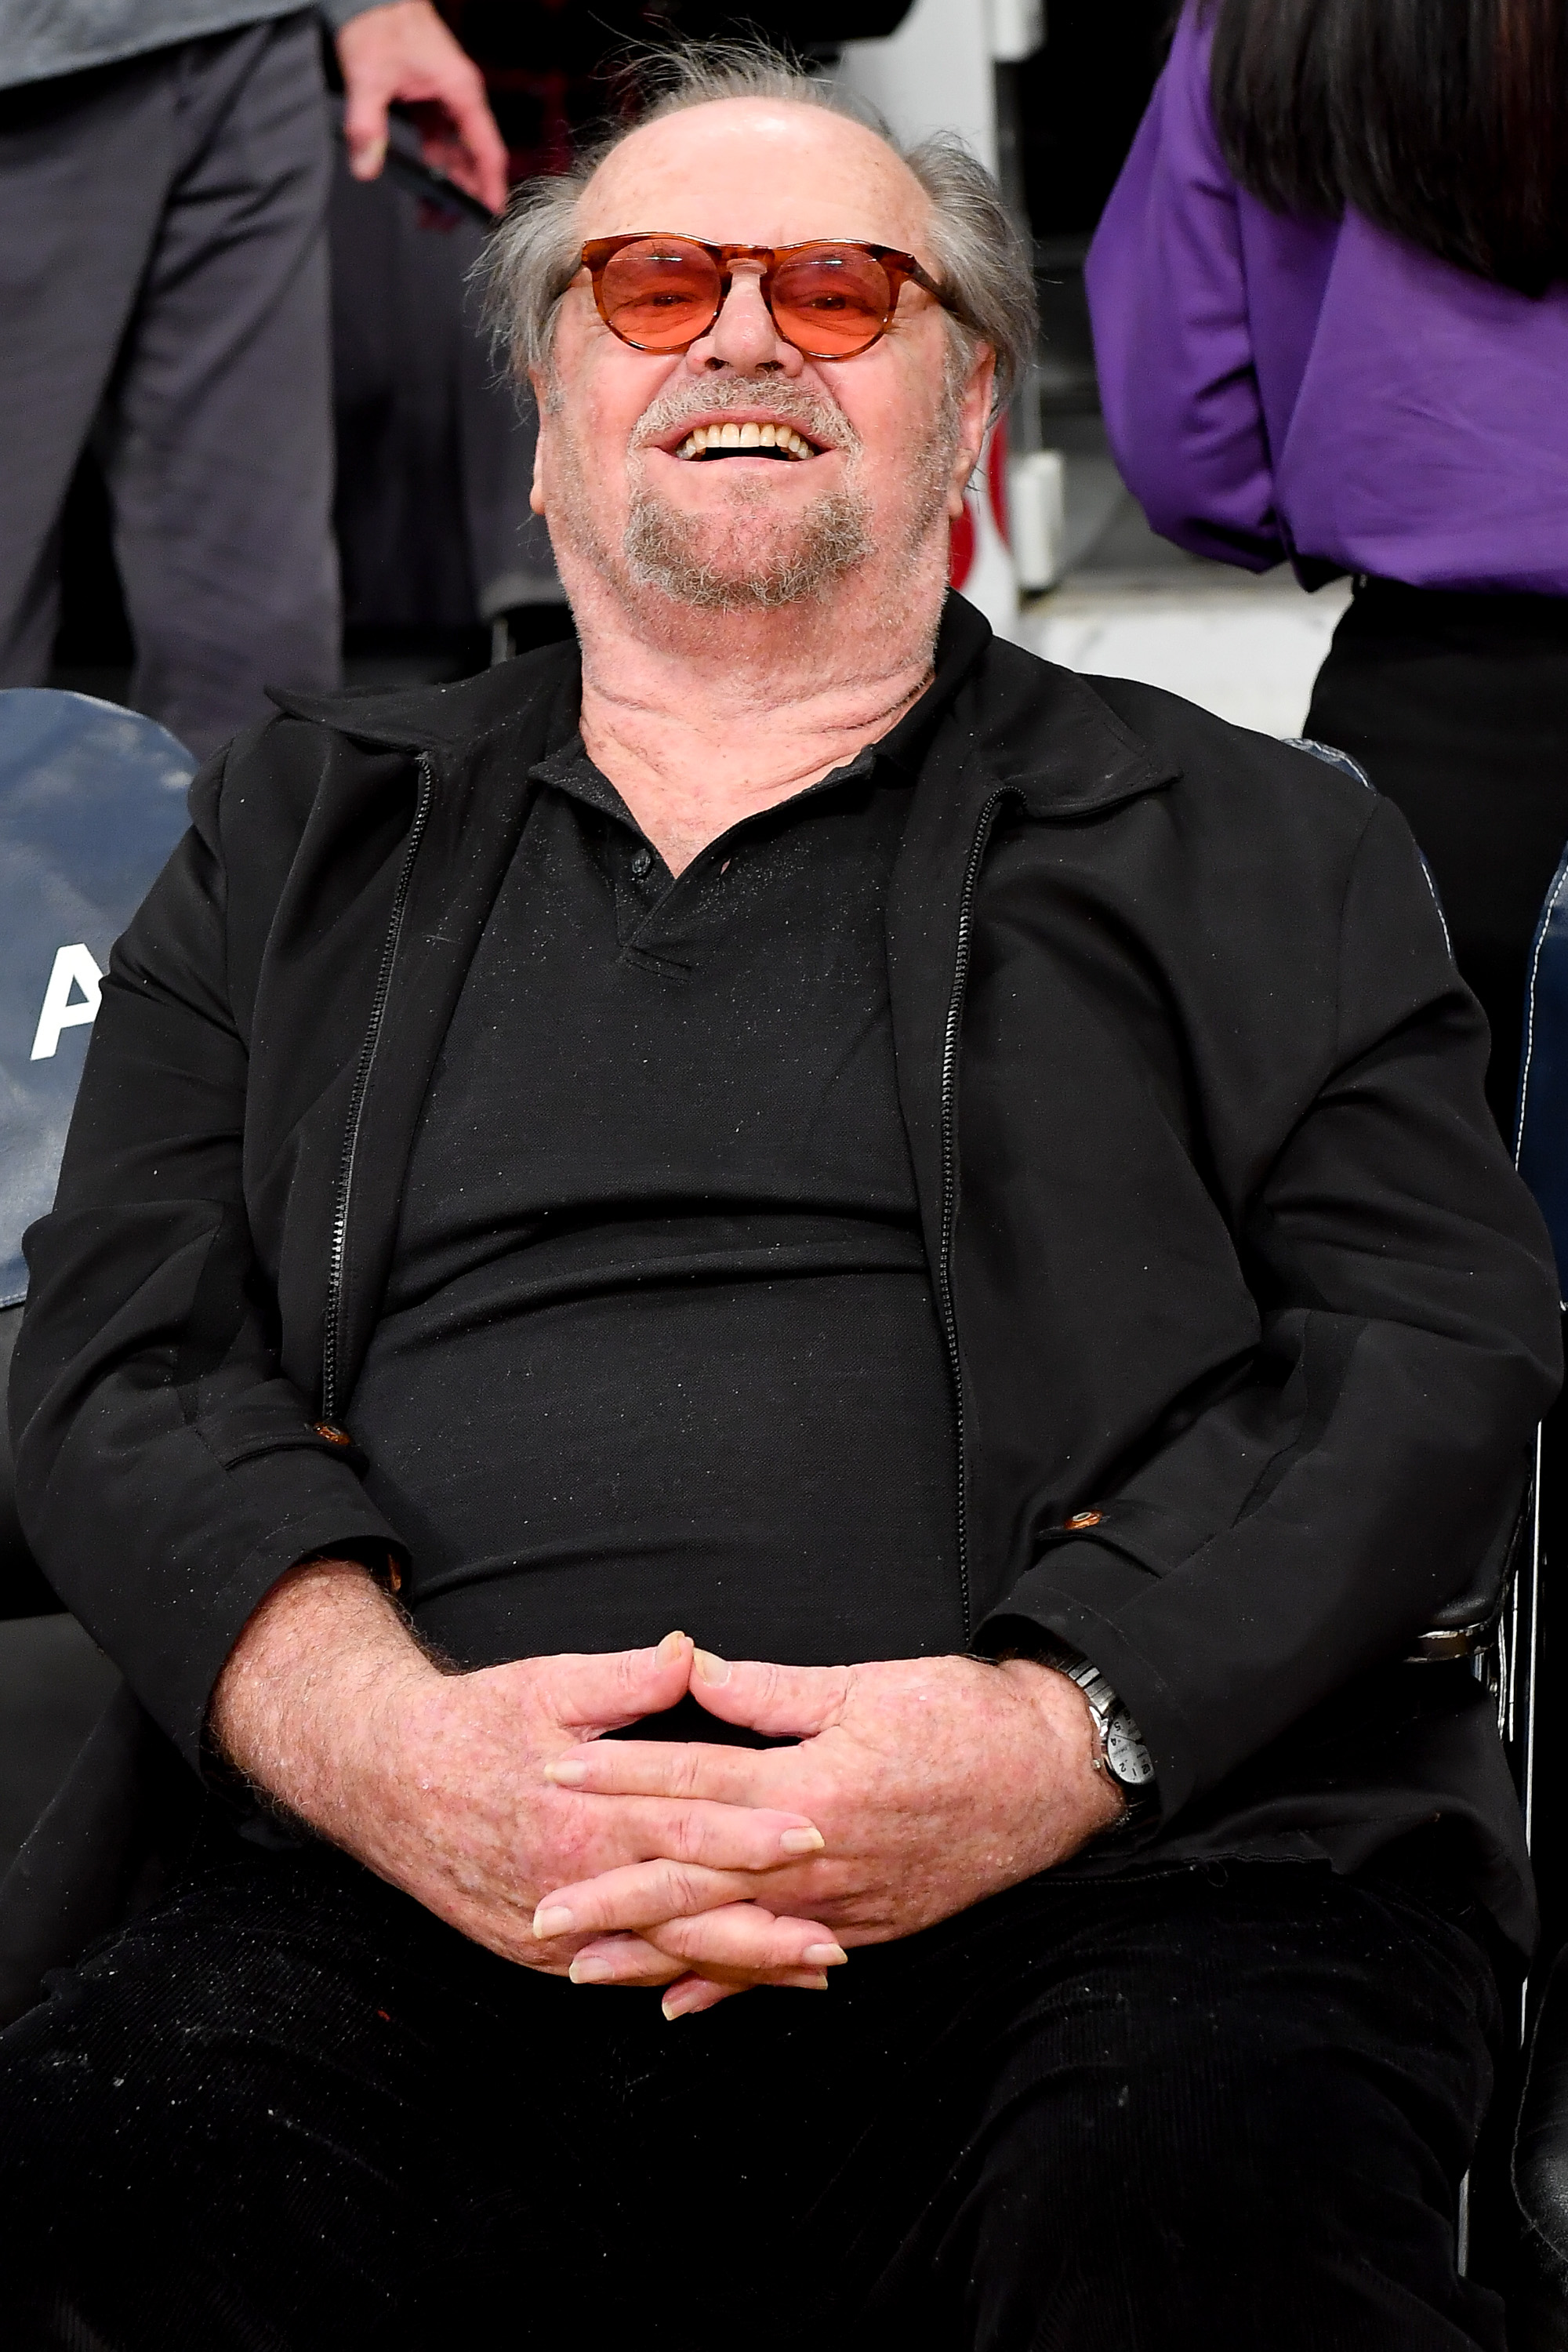 Jack Nicholson at a basketball game on January 7, 2020 in Los Angeles, California | Source: Getty Images